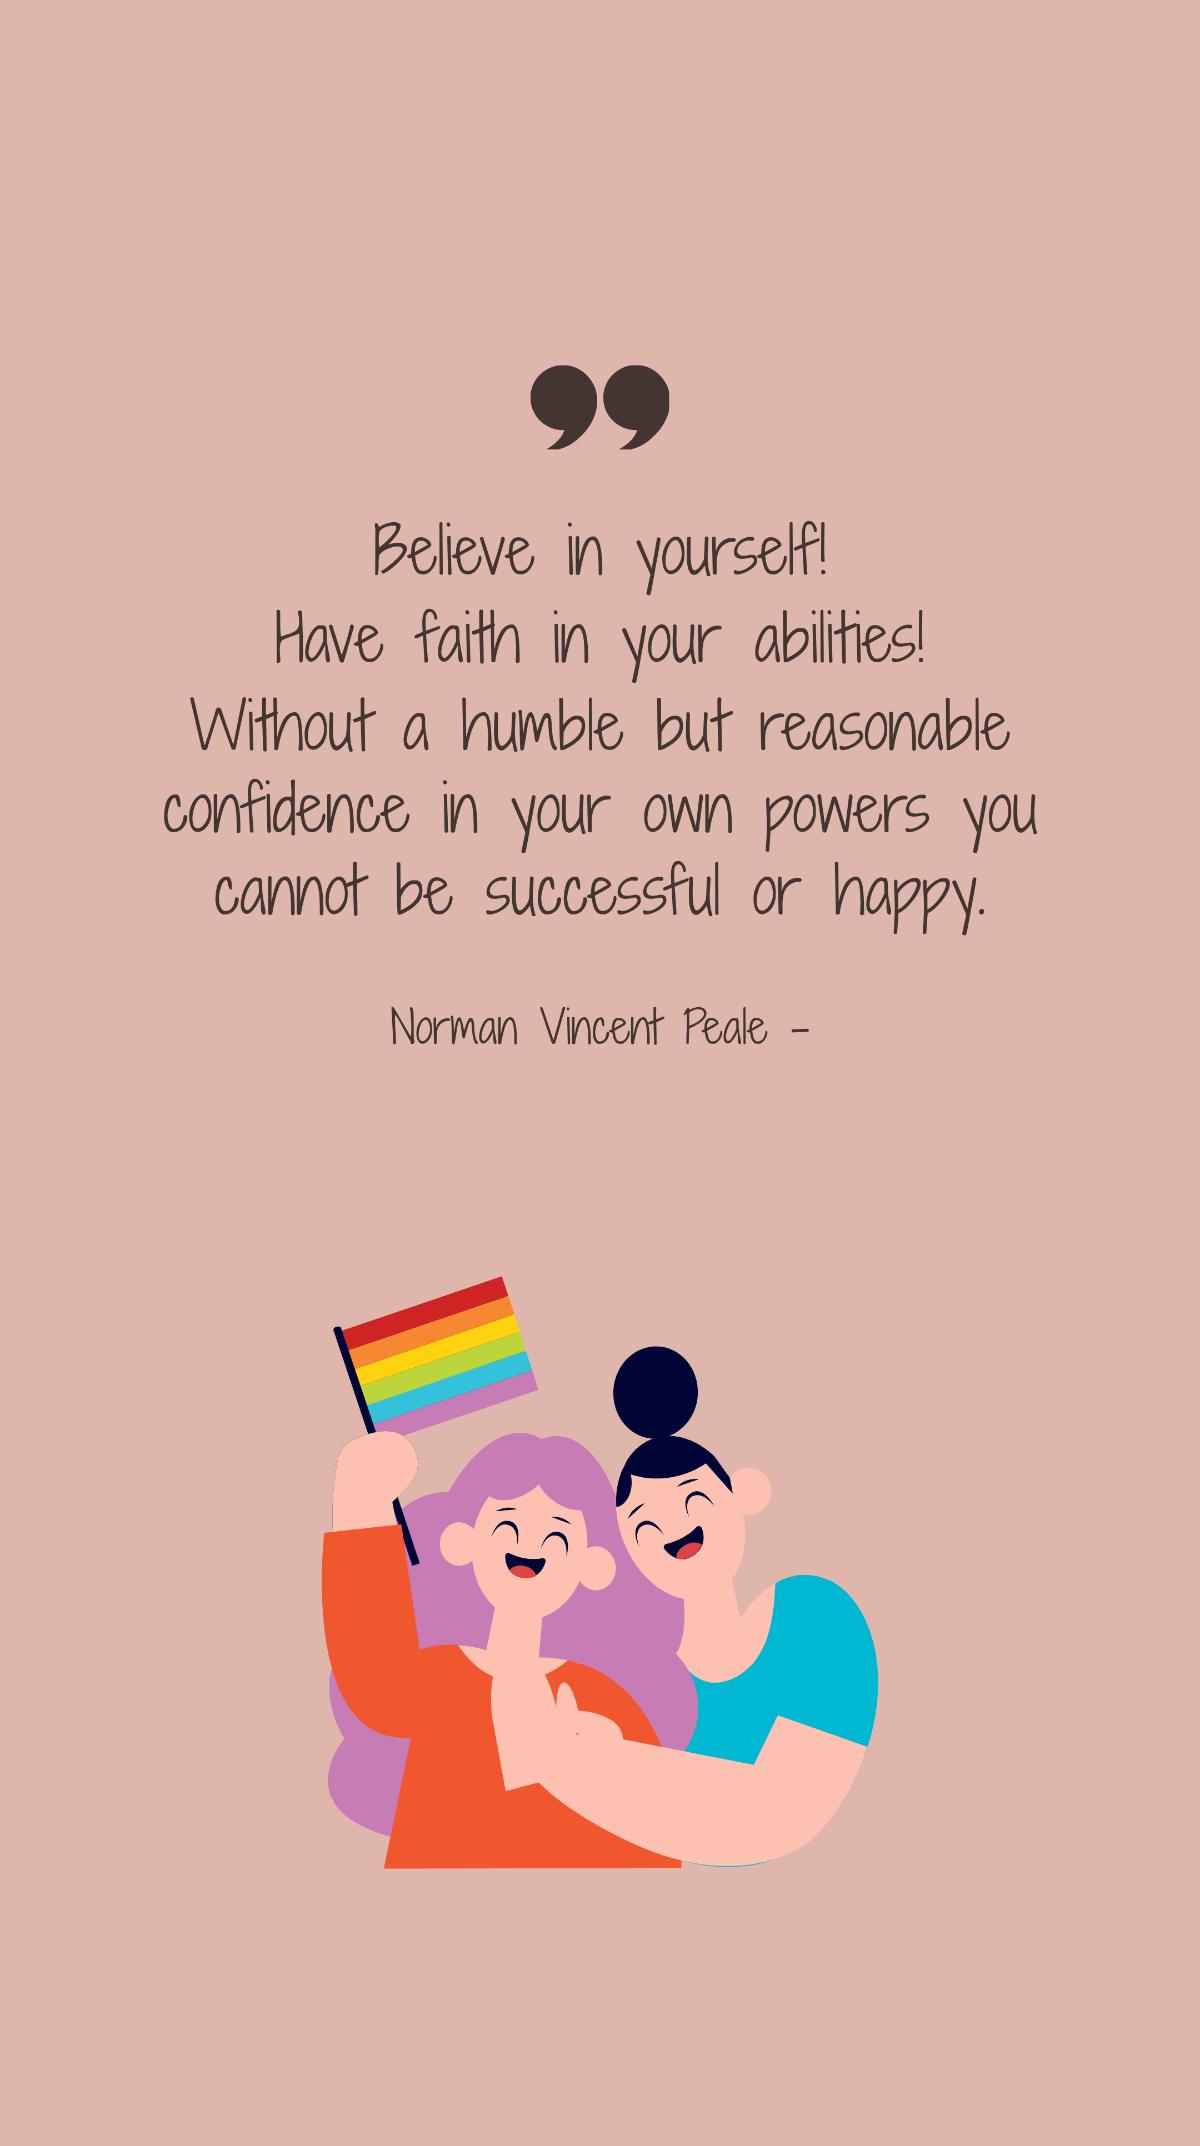 Free Norman Vincent Peale - Believe in yourself! Have faith in your abilities! Without a humble but reasonable confidence in your own powers you cannot be successful or happy. Template